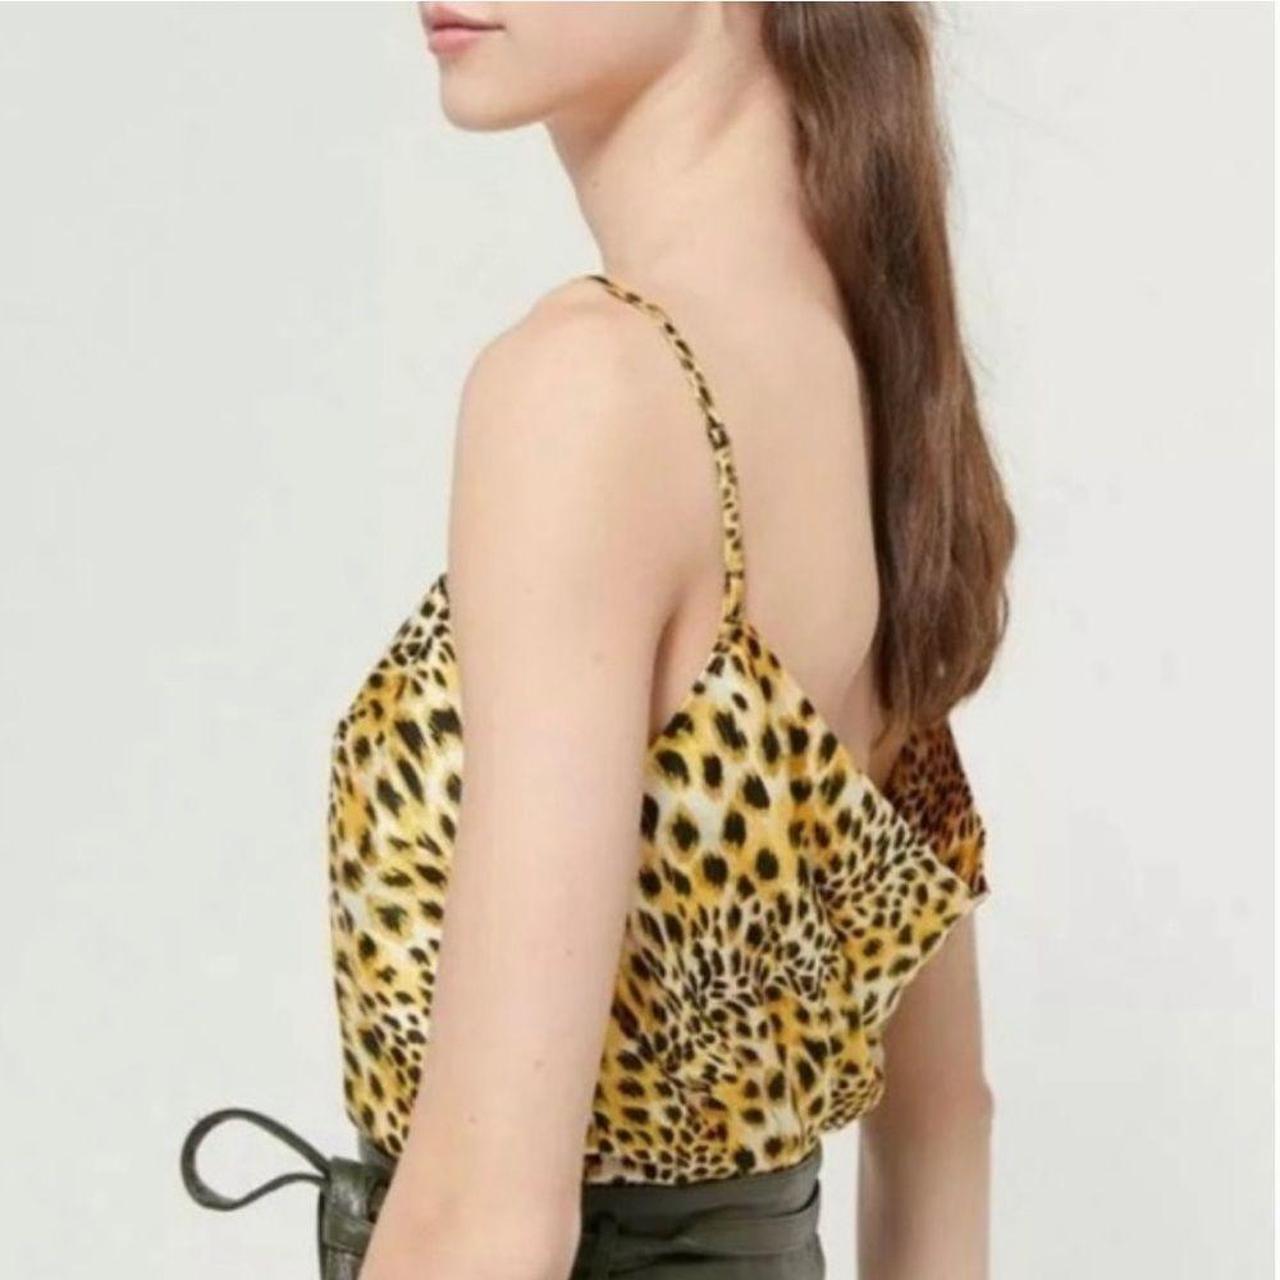 Urban Outfitters Women's Gold and Black Vest (2)